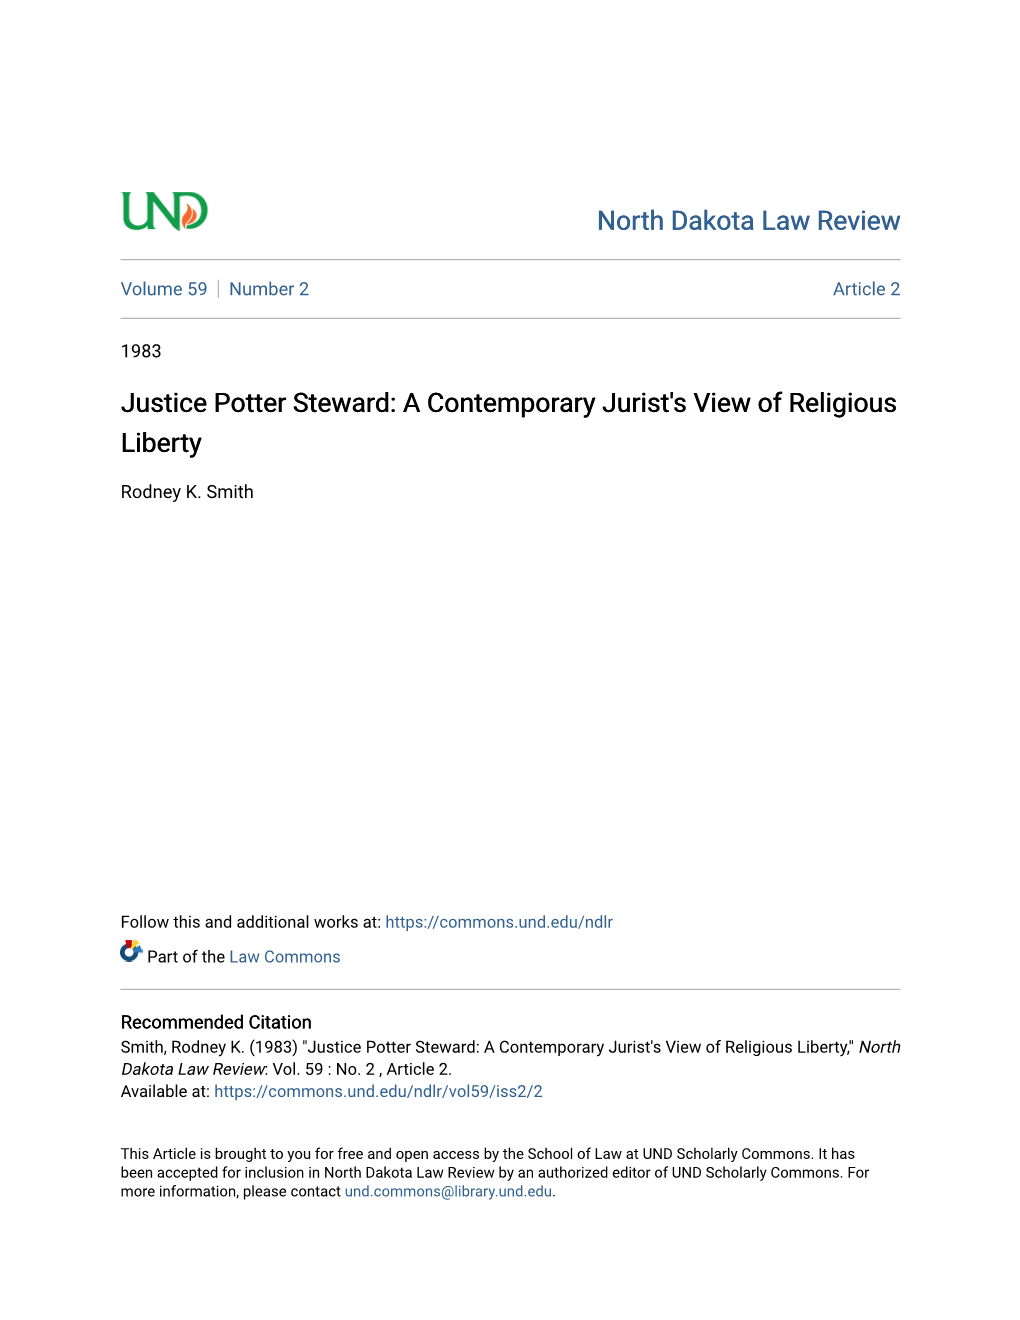 Justice Potter Steward: a Contemporary Jurist's View of Religious Liberty